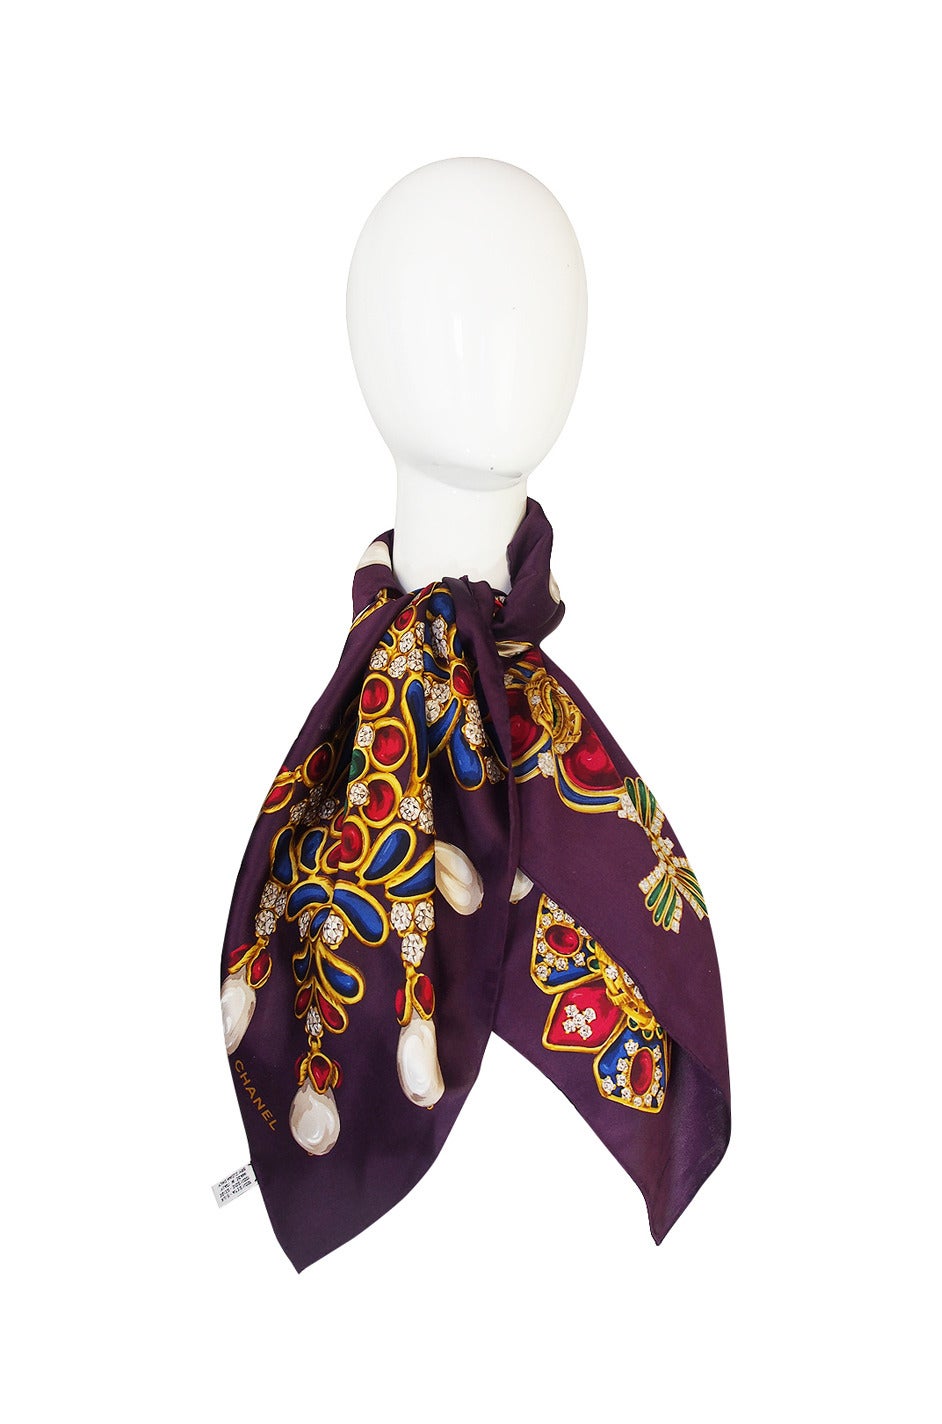 Beautiful silk Chanel scarf on a bright combination of purples and brilliant jewel tones with a jewellery print that covers the scarf. The colors are bright and vibrant and it is quintessentially Chanel.

Appears to have been never been used or